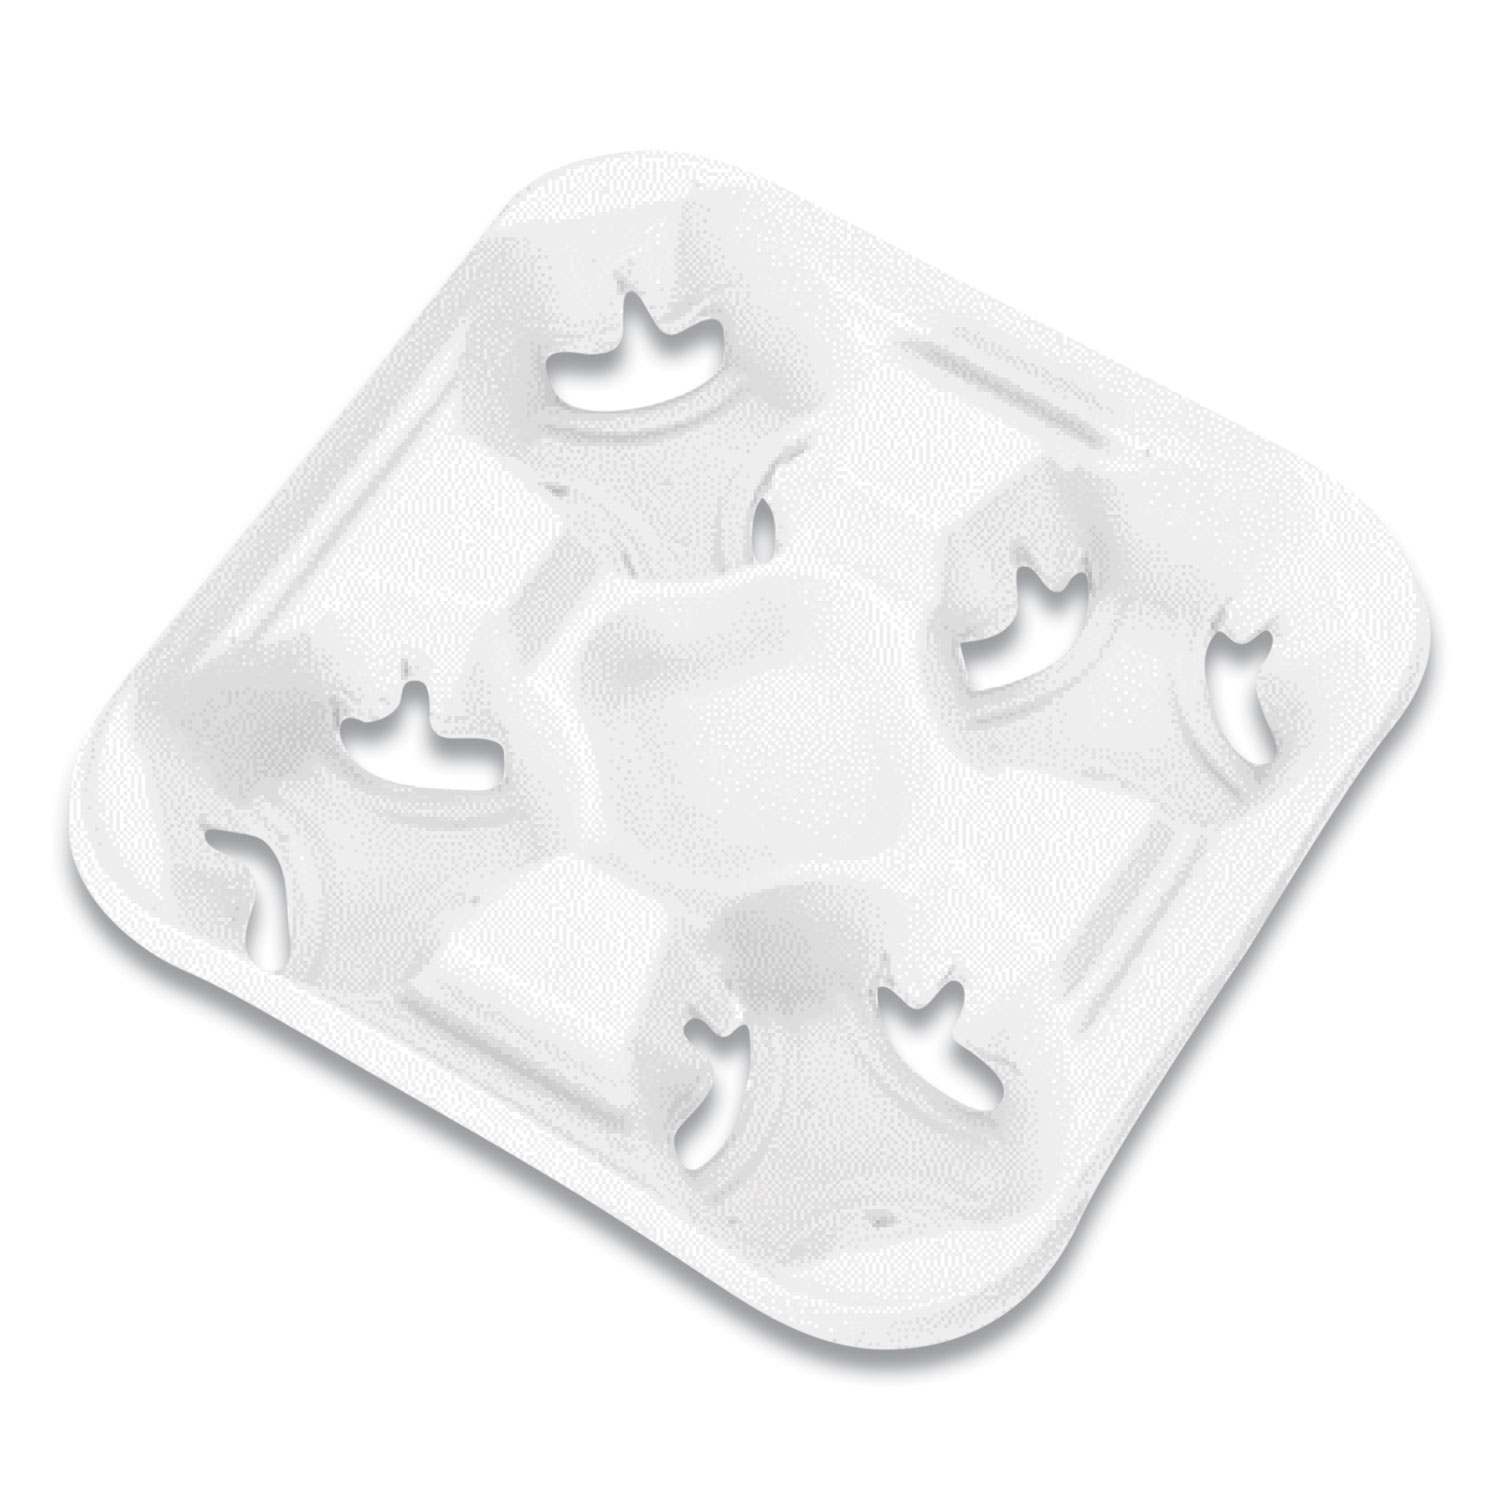  Chinet 21078 StrongHolder Molded Fiber Cup Tray, 8-32 oz, Four Cups, White, 300/Carton (HUH21078) 